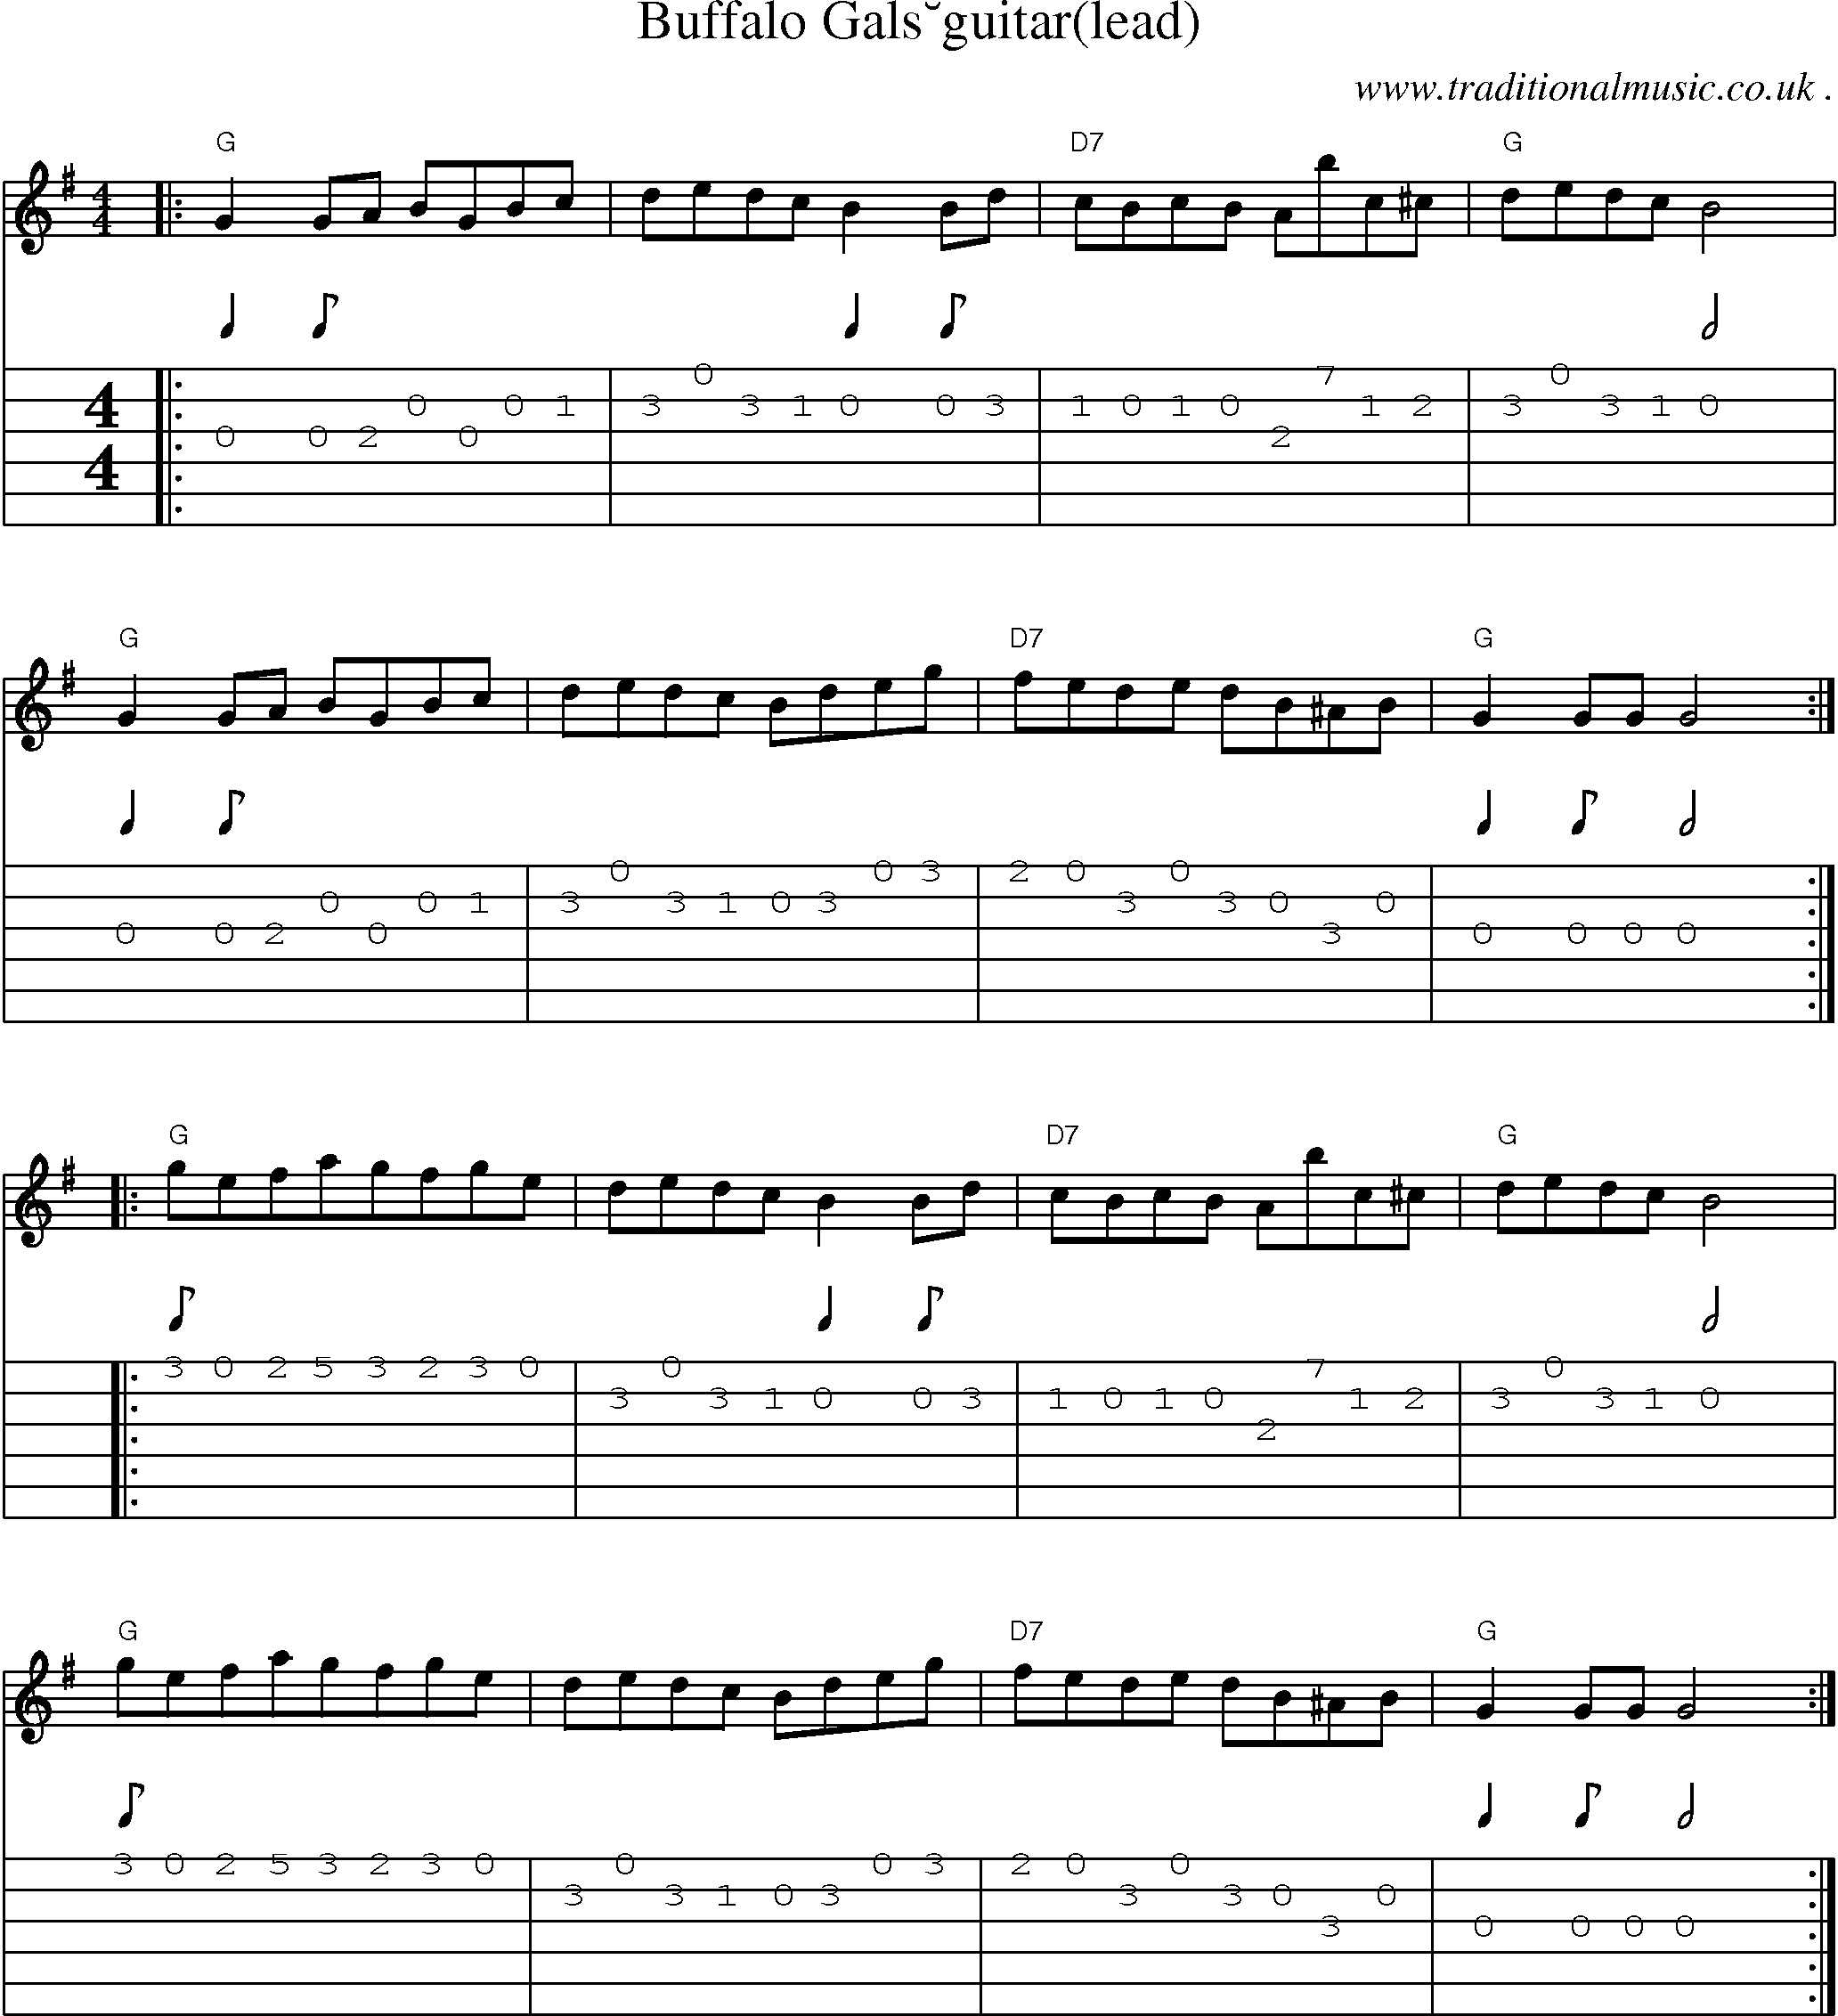 Music Score and Guitar Tabs for Buffalo Gals guitar ld